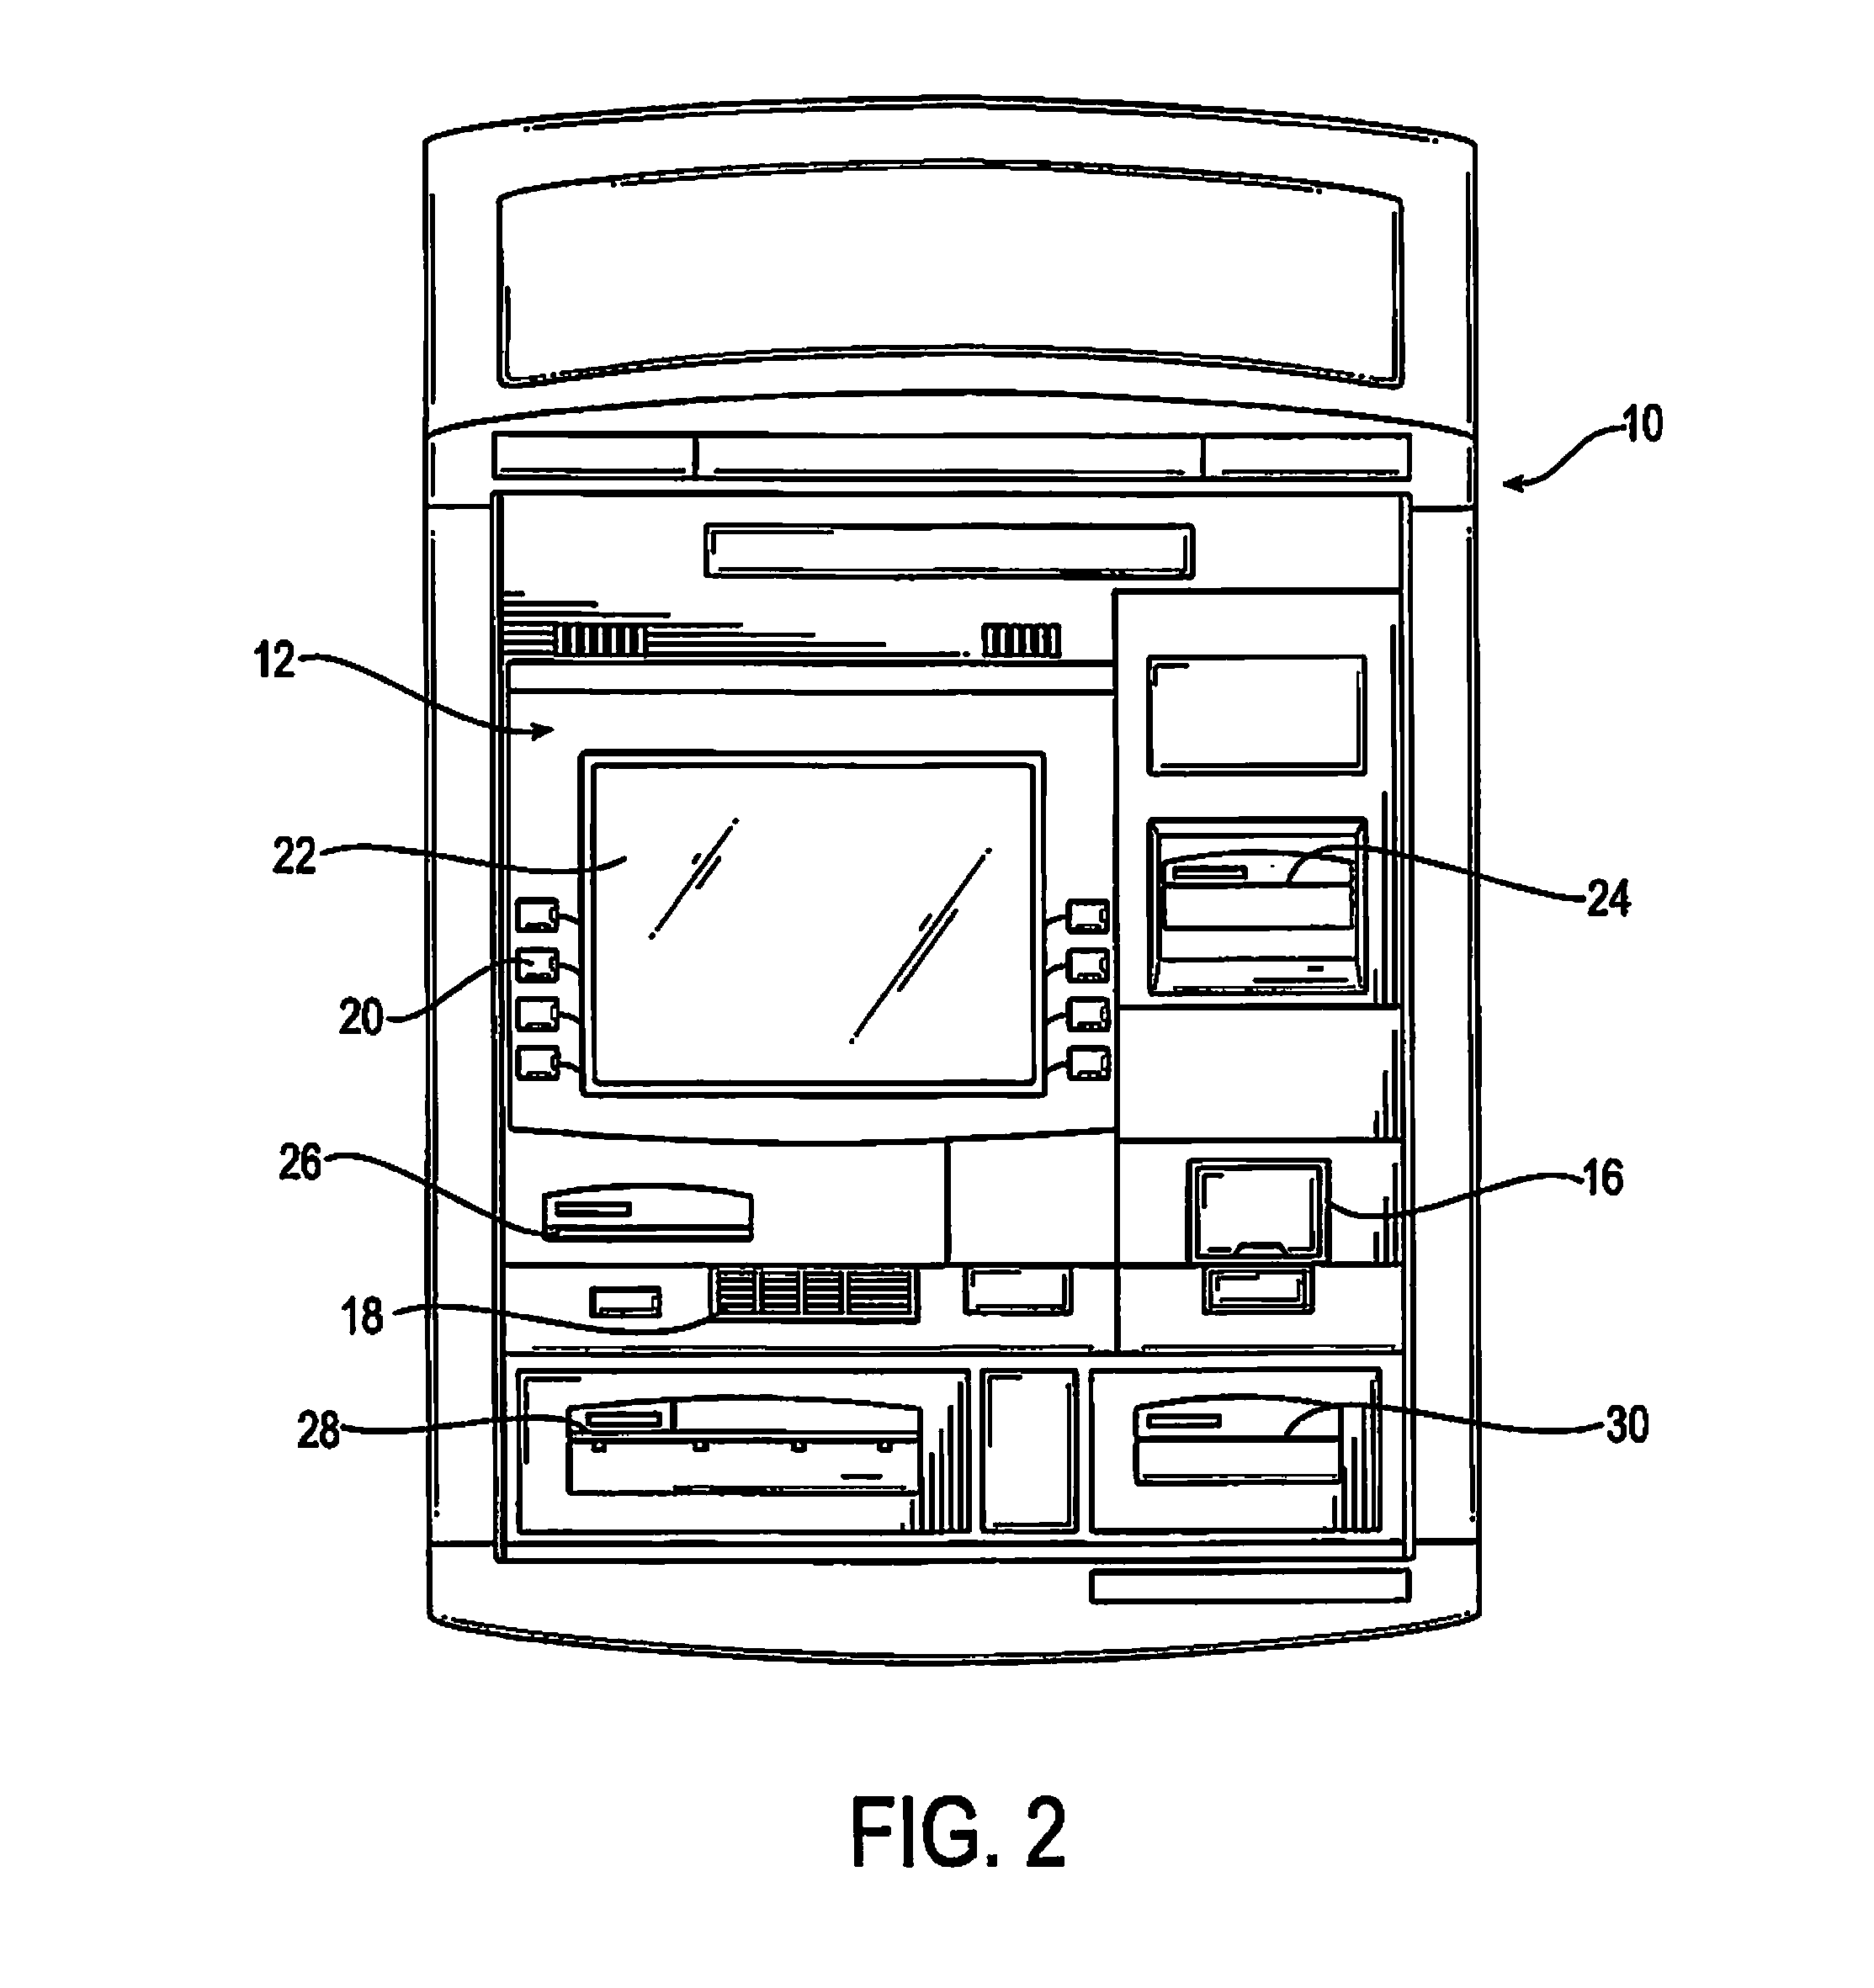 Automated teller machine with an encrypting card reader and an encrypting pin pad